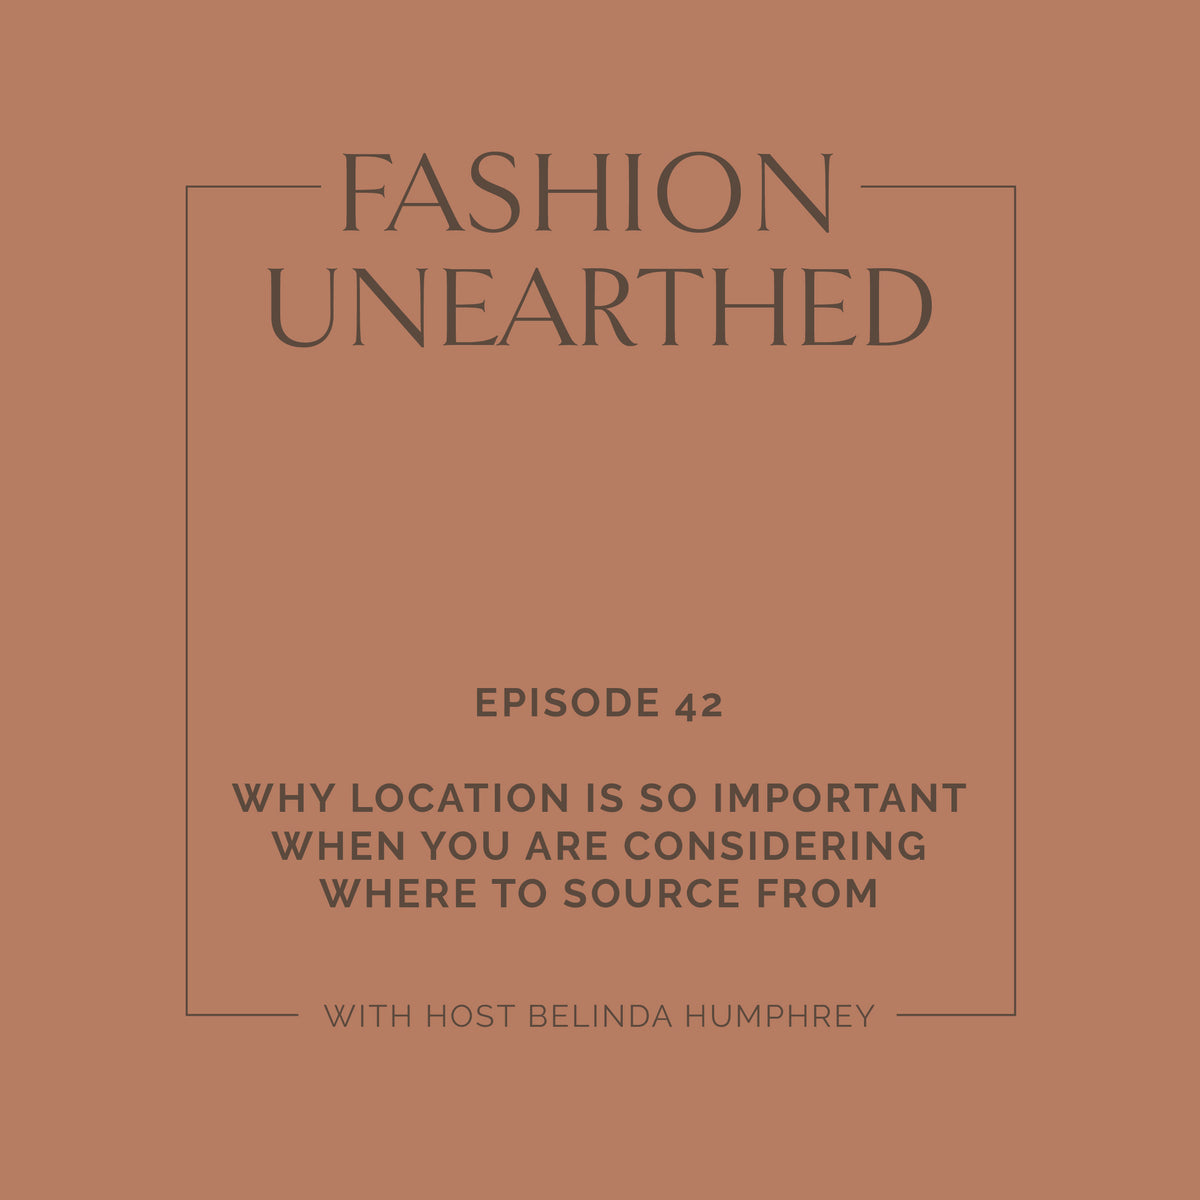 Episode 42: Why location is so important when you are considering where to source from